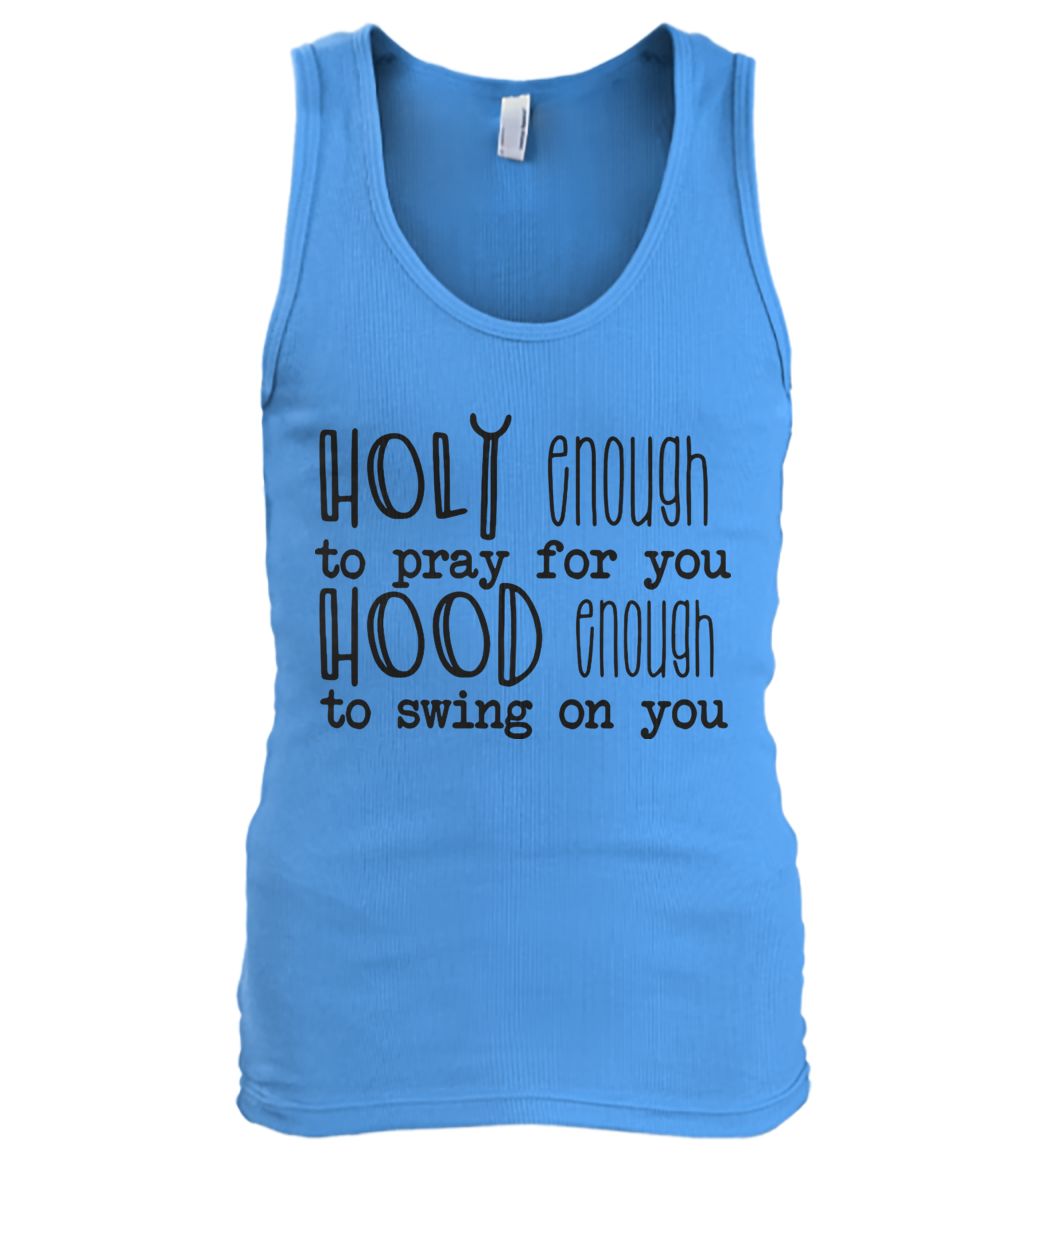 Holy enough to pray for you hood enough to swing on you men's tank top